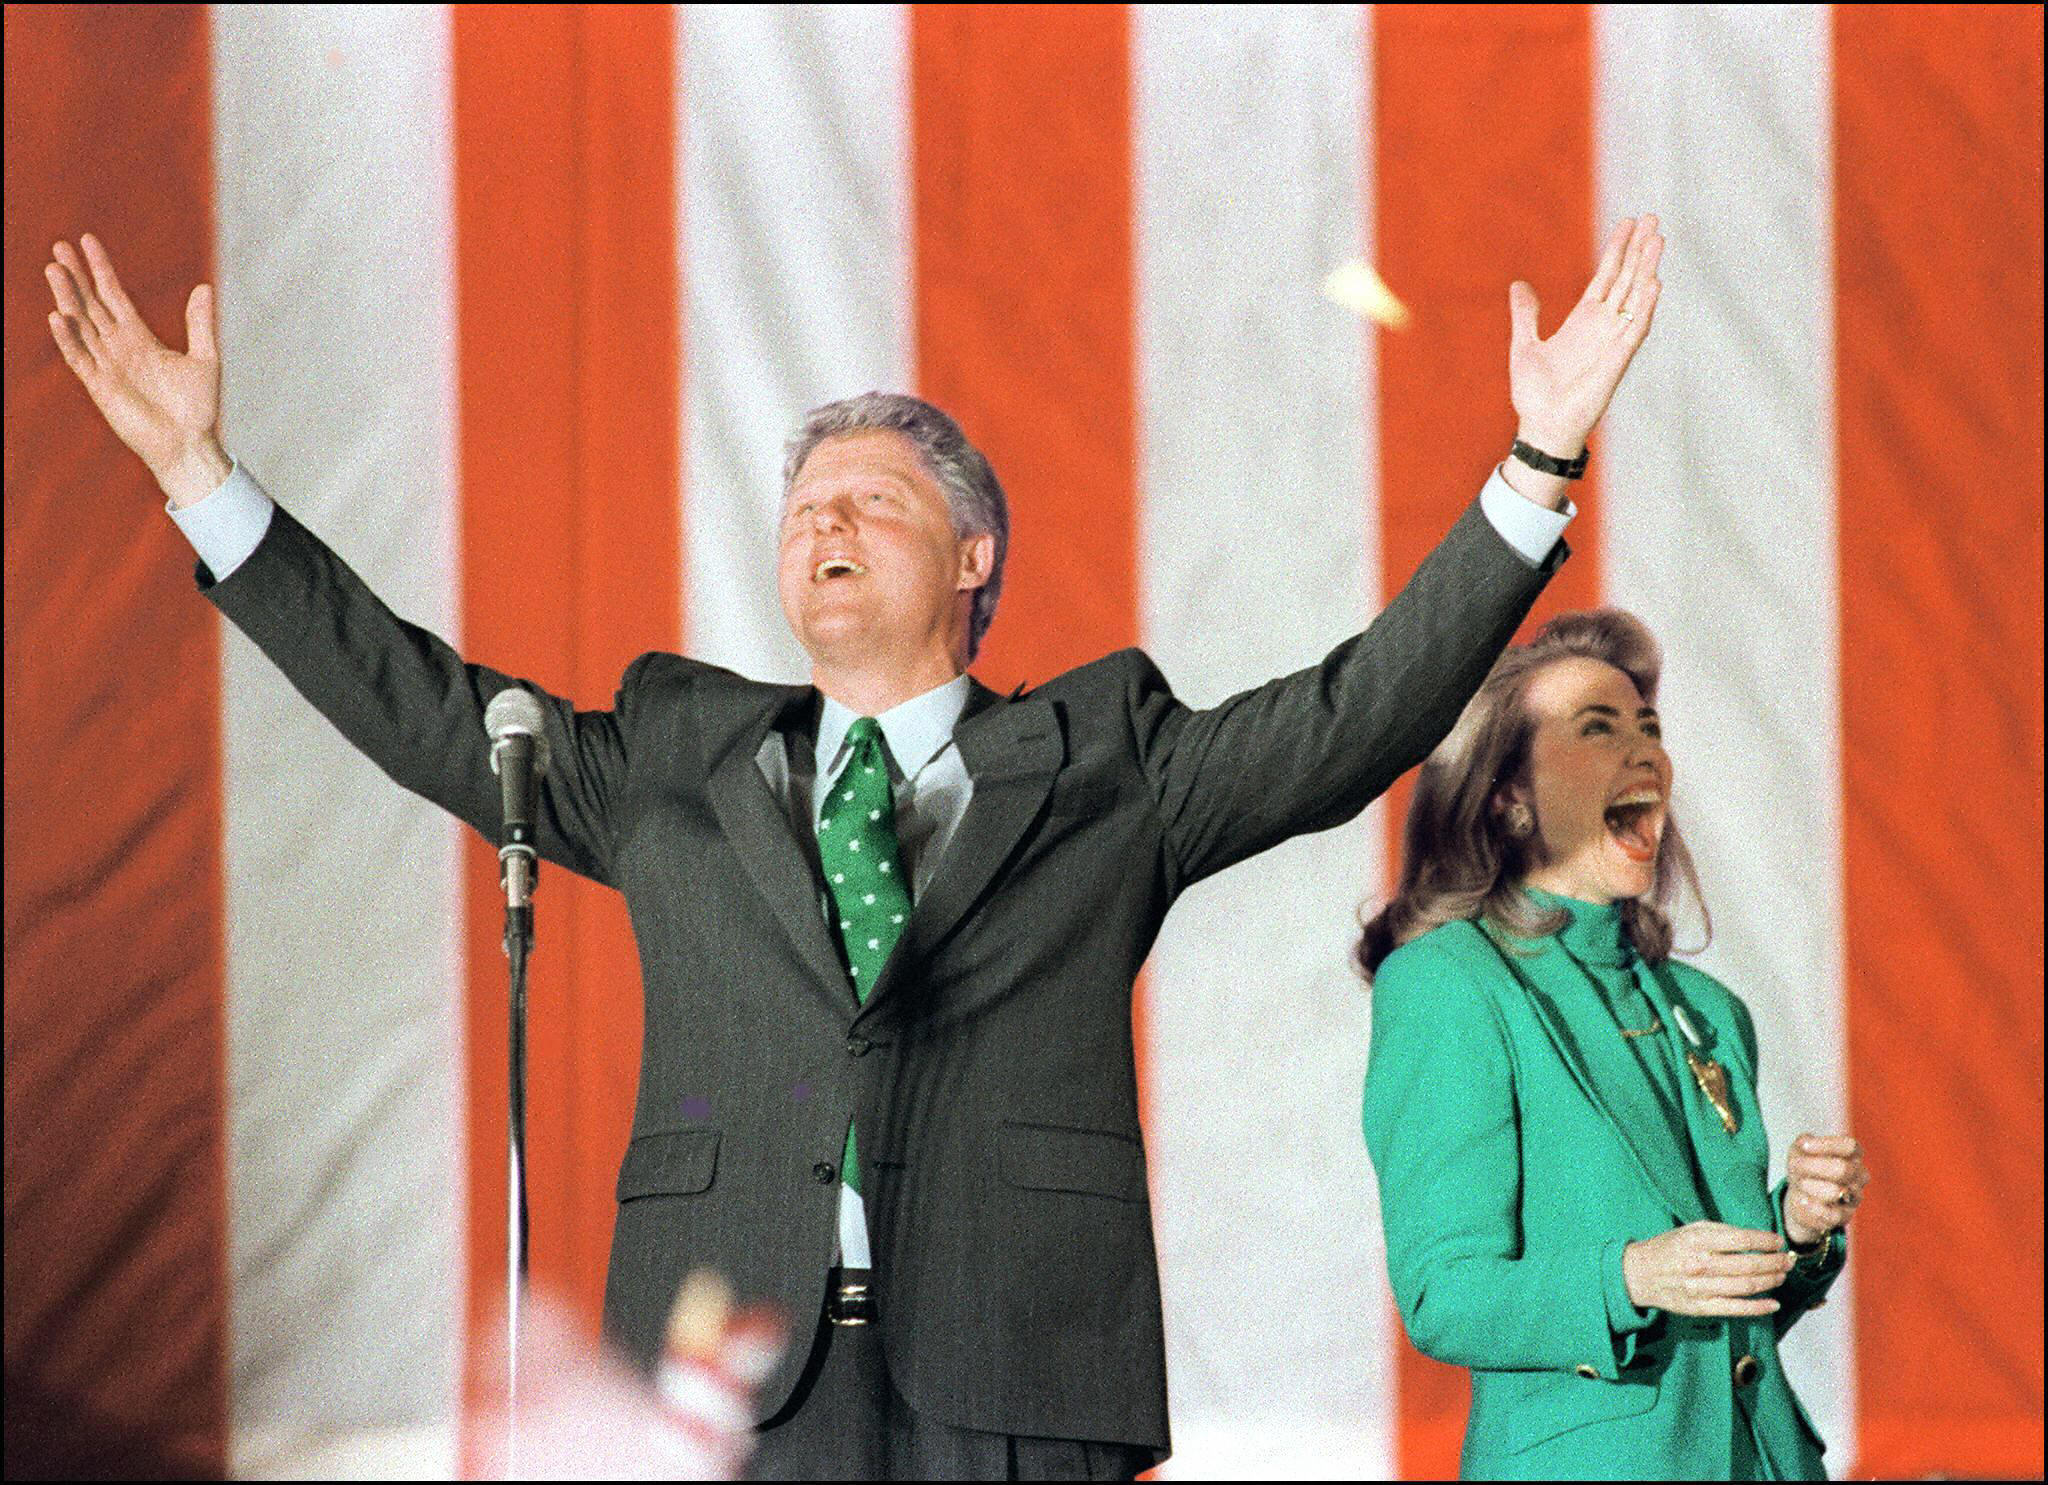 Bill and Hillary Clinton in 1992.